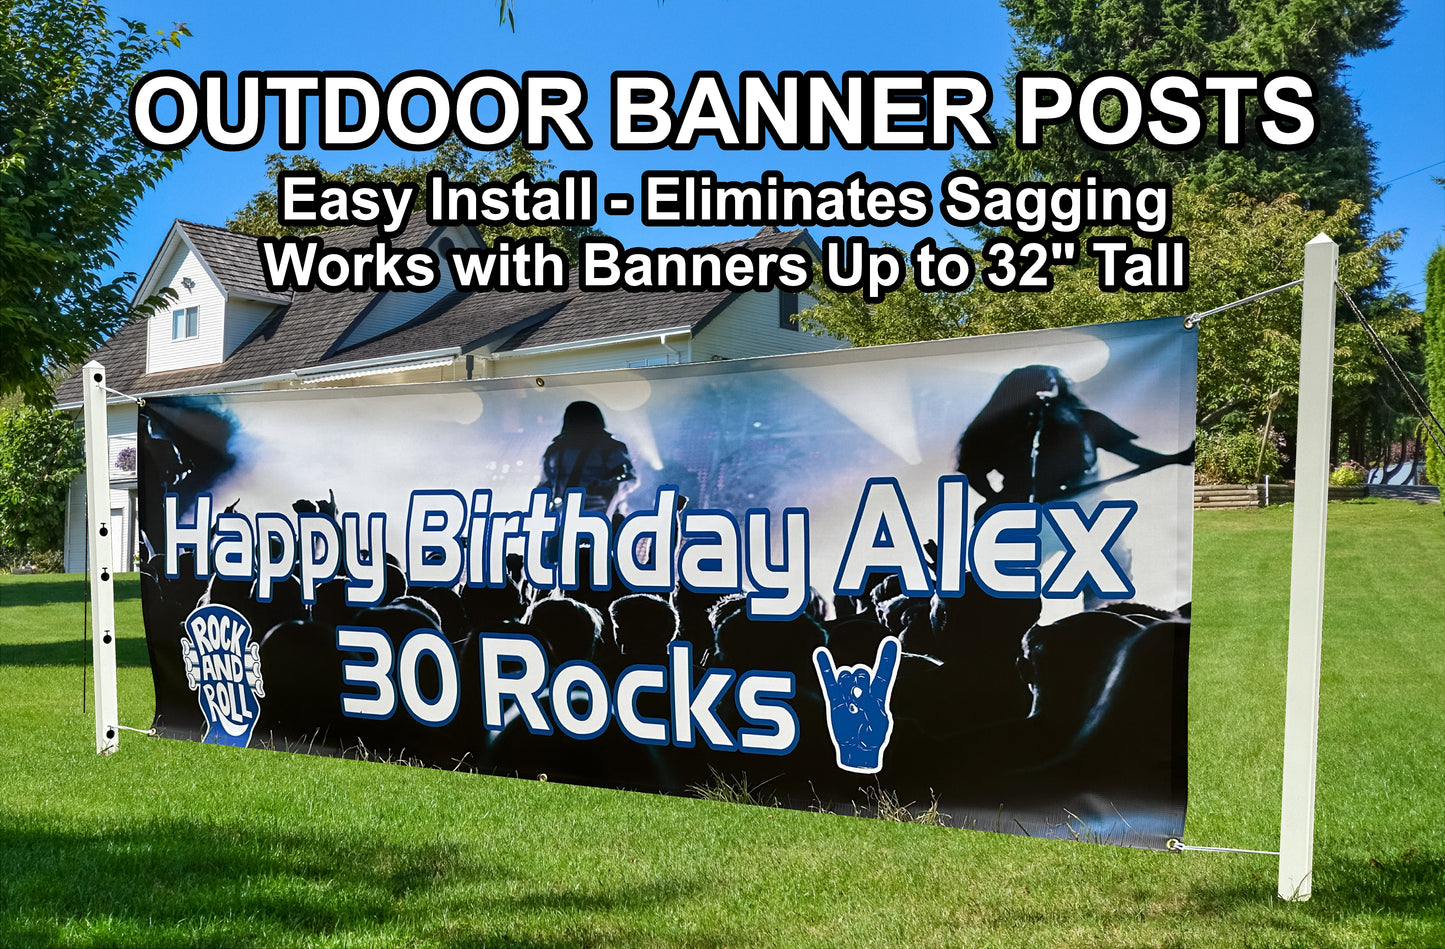 Birthday Banner, Vintage Right Side Name, 4 Sizes, Custom Personalized Vinyl Indoor/Outdoor Party Decoration, BB144